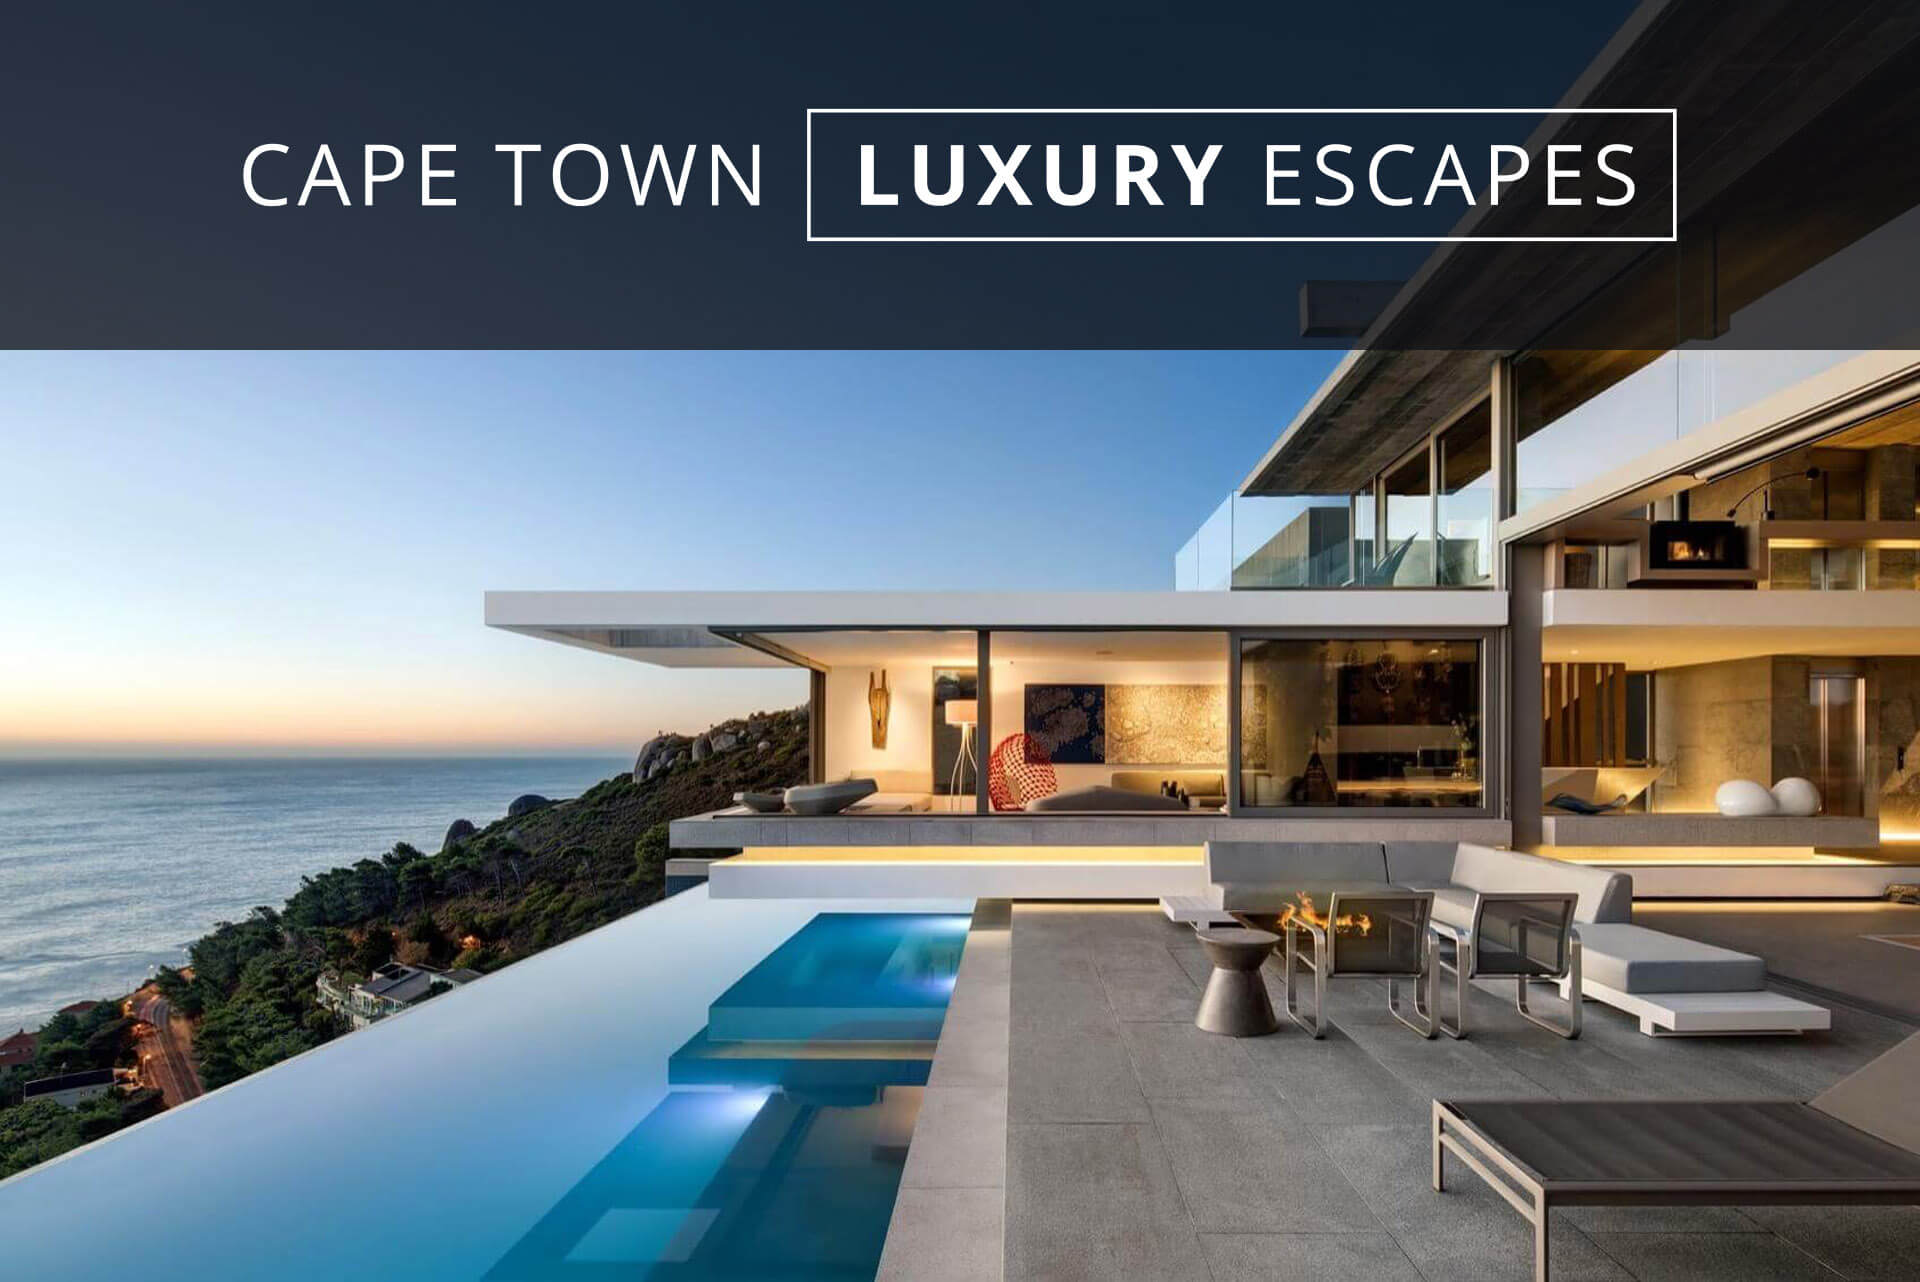 Luxury Villa Rentals in Cape Town by Cape Town Luxury Escapes